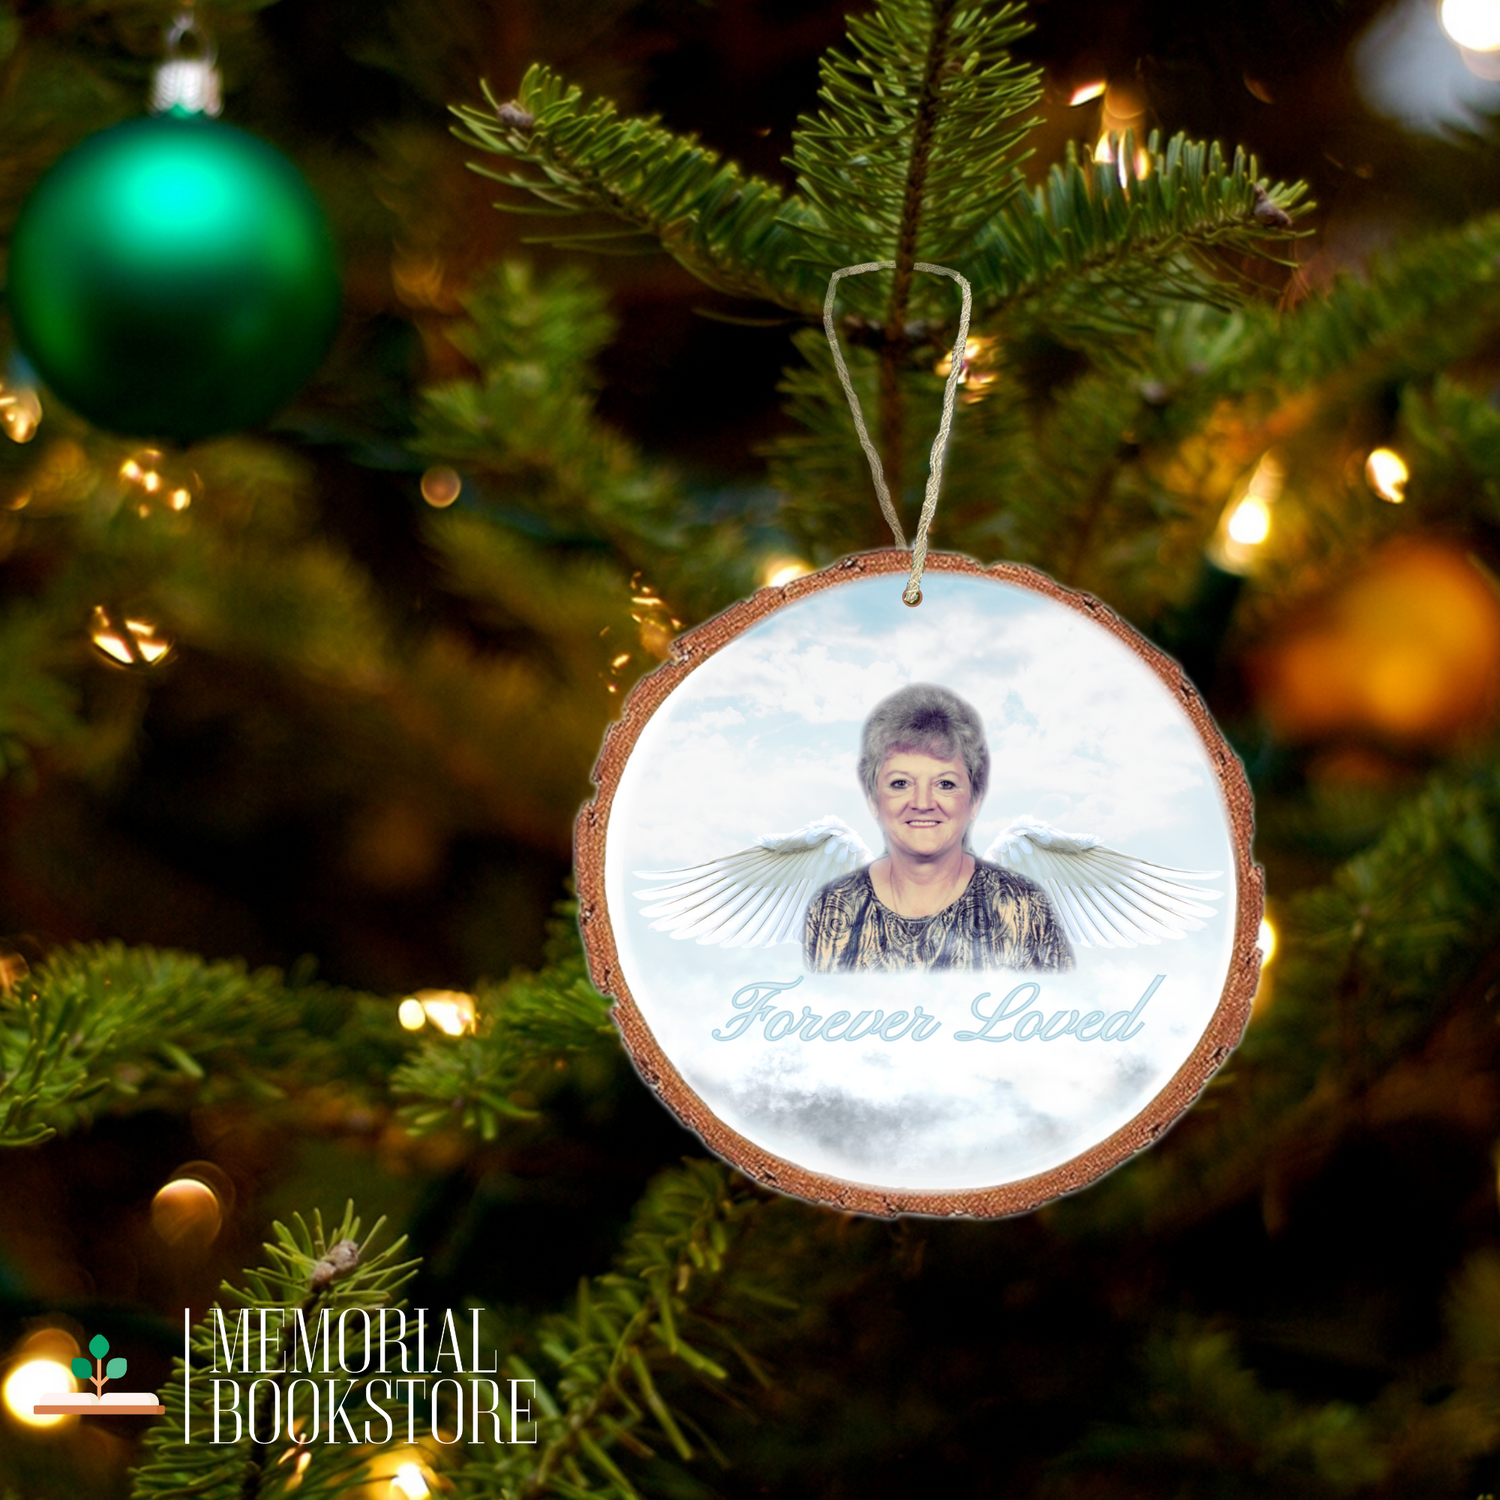 Personlized Wood Ornament with a picture of your loved one made into an angel in Heaven. Pictured on a Christmas tree for the holidays.